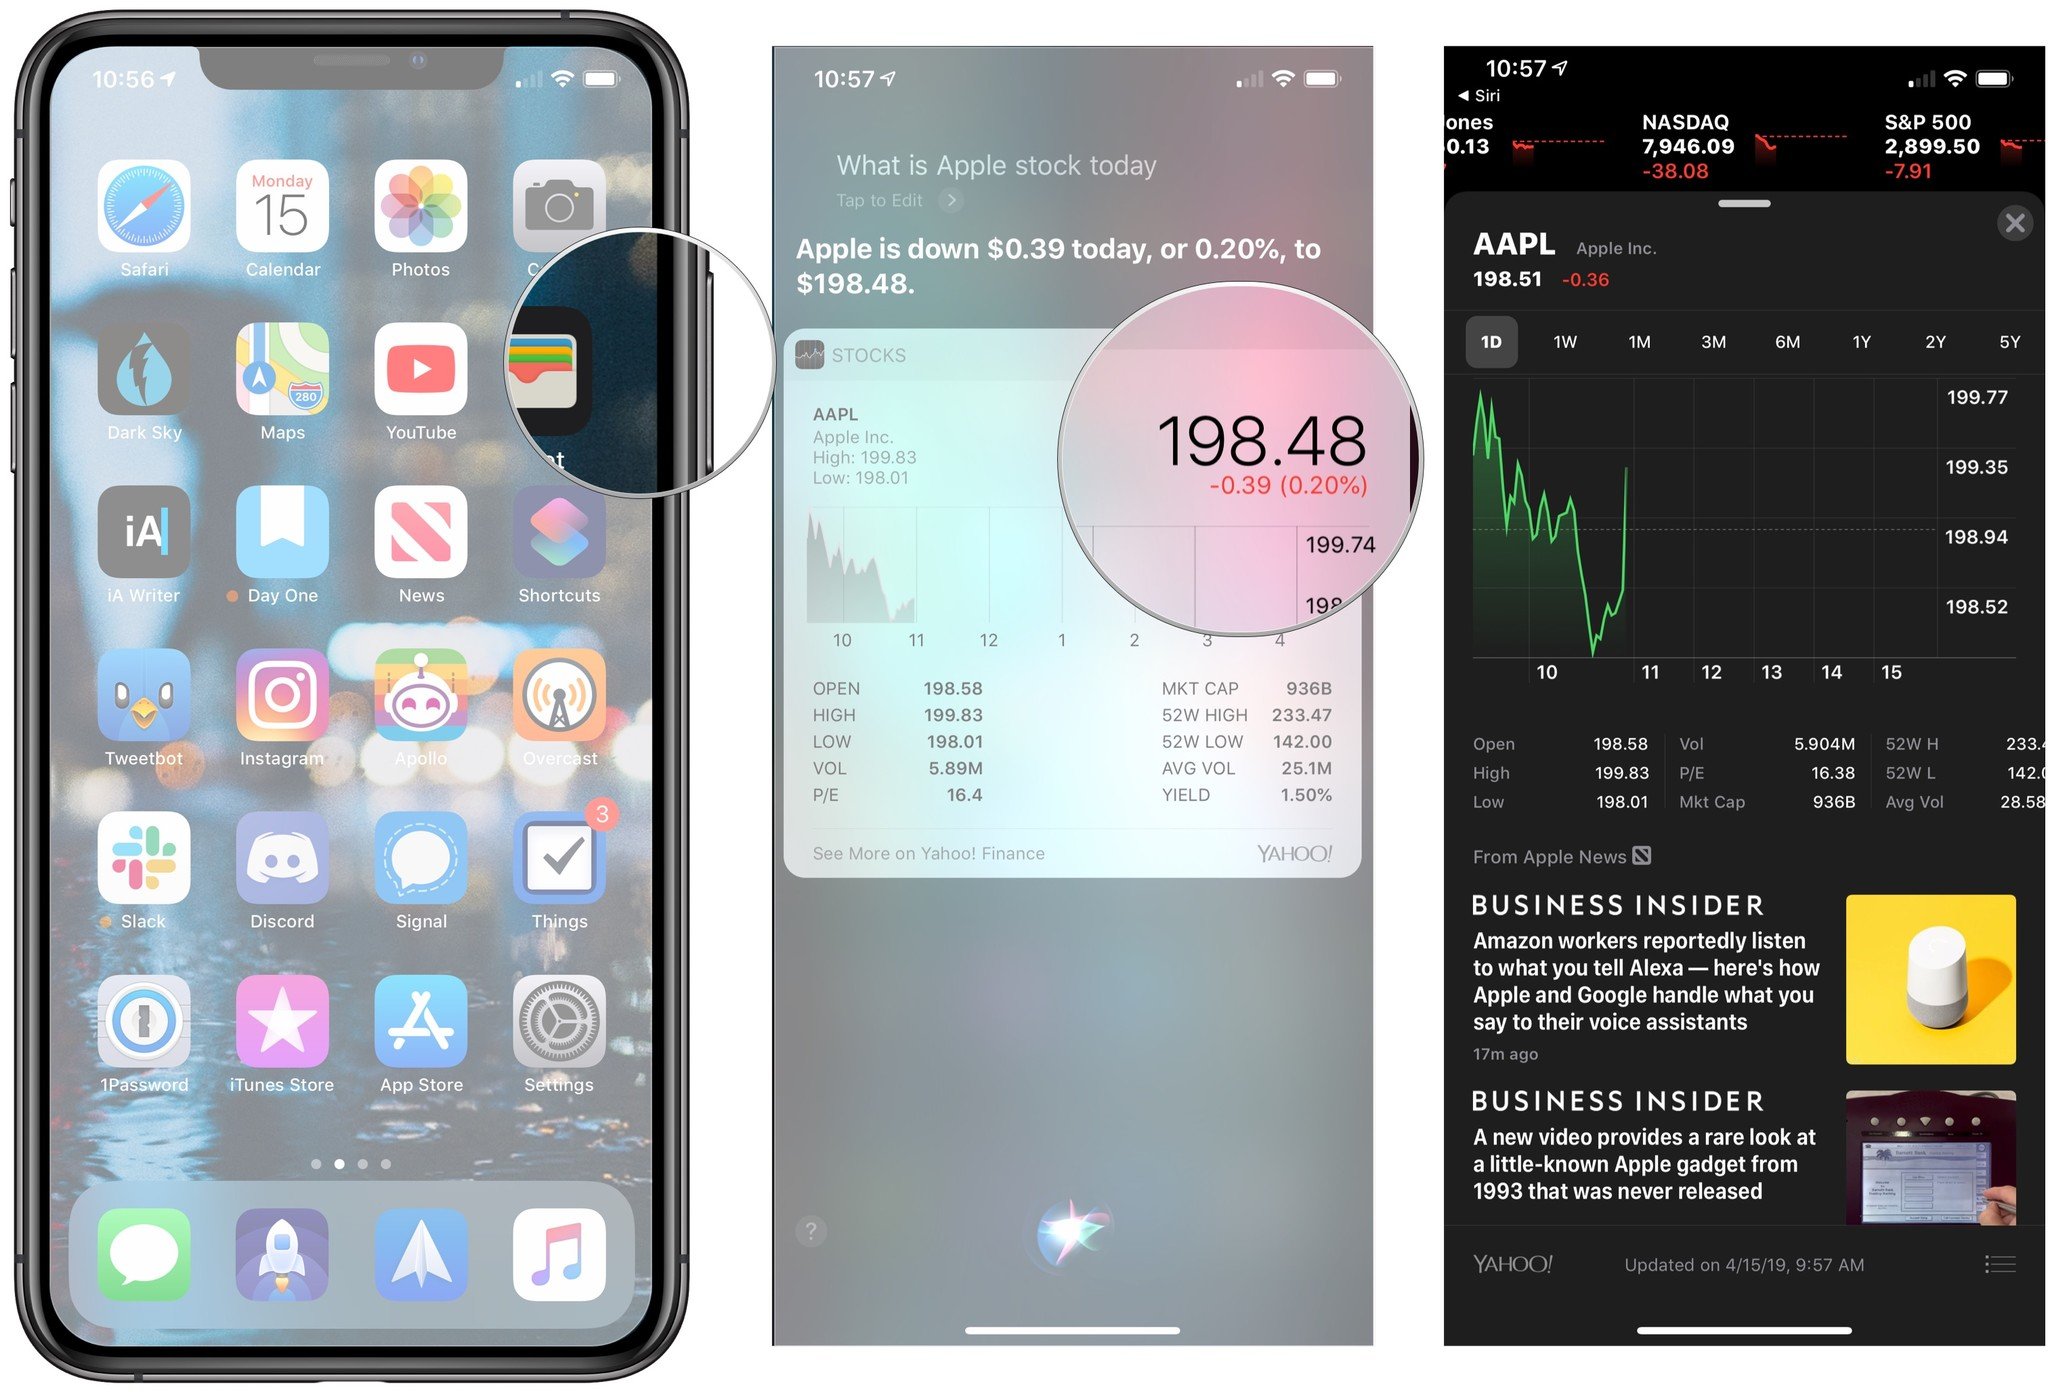 Press and hold button, say "What is Apple (or other stock) doing today?", tap on widget